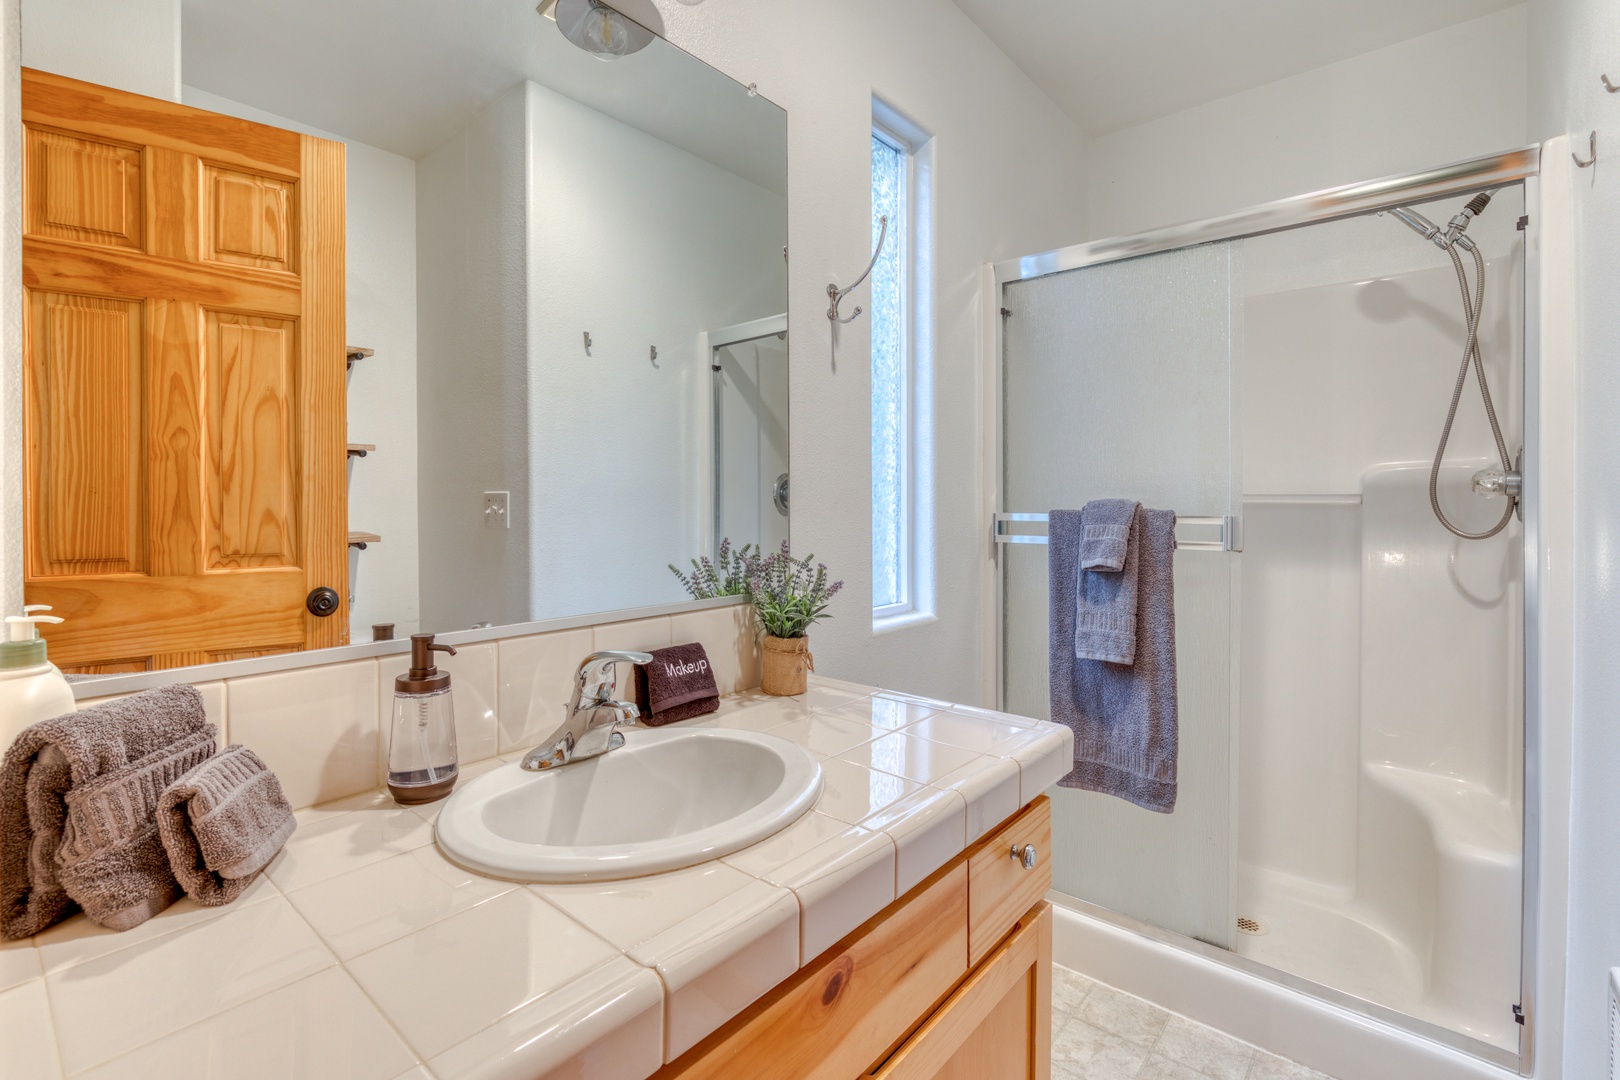 Brightwood Vacation Rentals, Riverside Retreat - The ensuite bath has a single vanity and walk-in shower